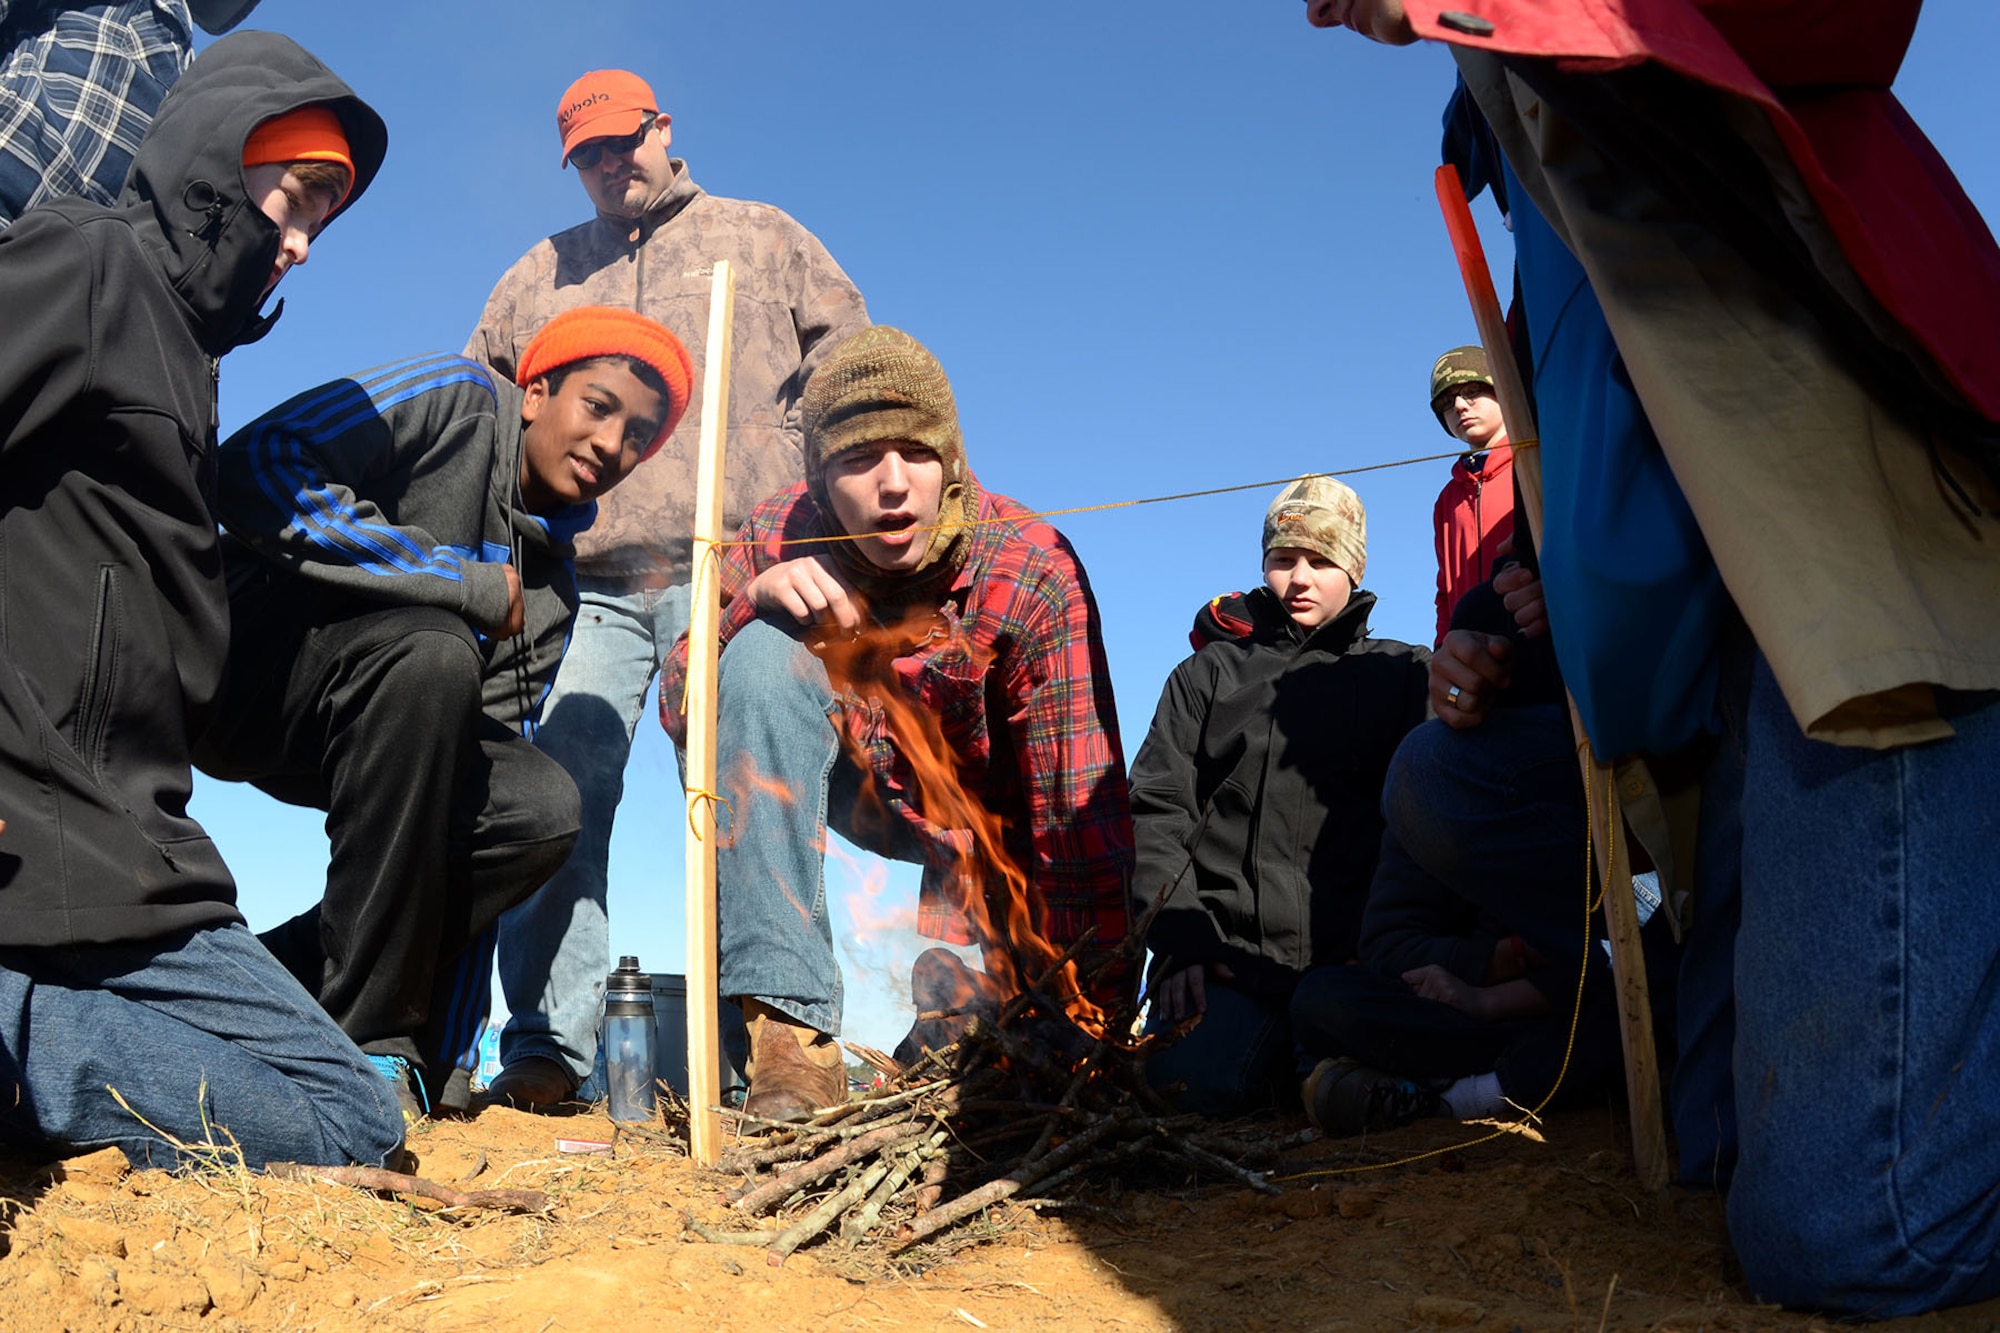 Boy Scouts with Troop 429 participate in a string burning competition during the Swamp Fox Camporee at McEntire Joint National Guard Base, S.C., Dec. 5, 2015. The event was hosted by the South Carolina National Guard to allow Cub Scouts and Boy Scouts the opportunity to interact with Guardsmen and compete to earn various merit badges. (U.S. Air National Guard photo by Airman Megan Floyd/RELEASED)